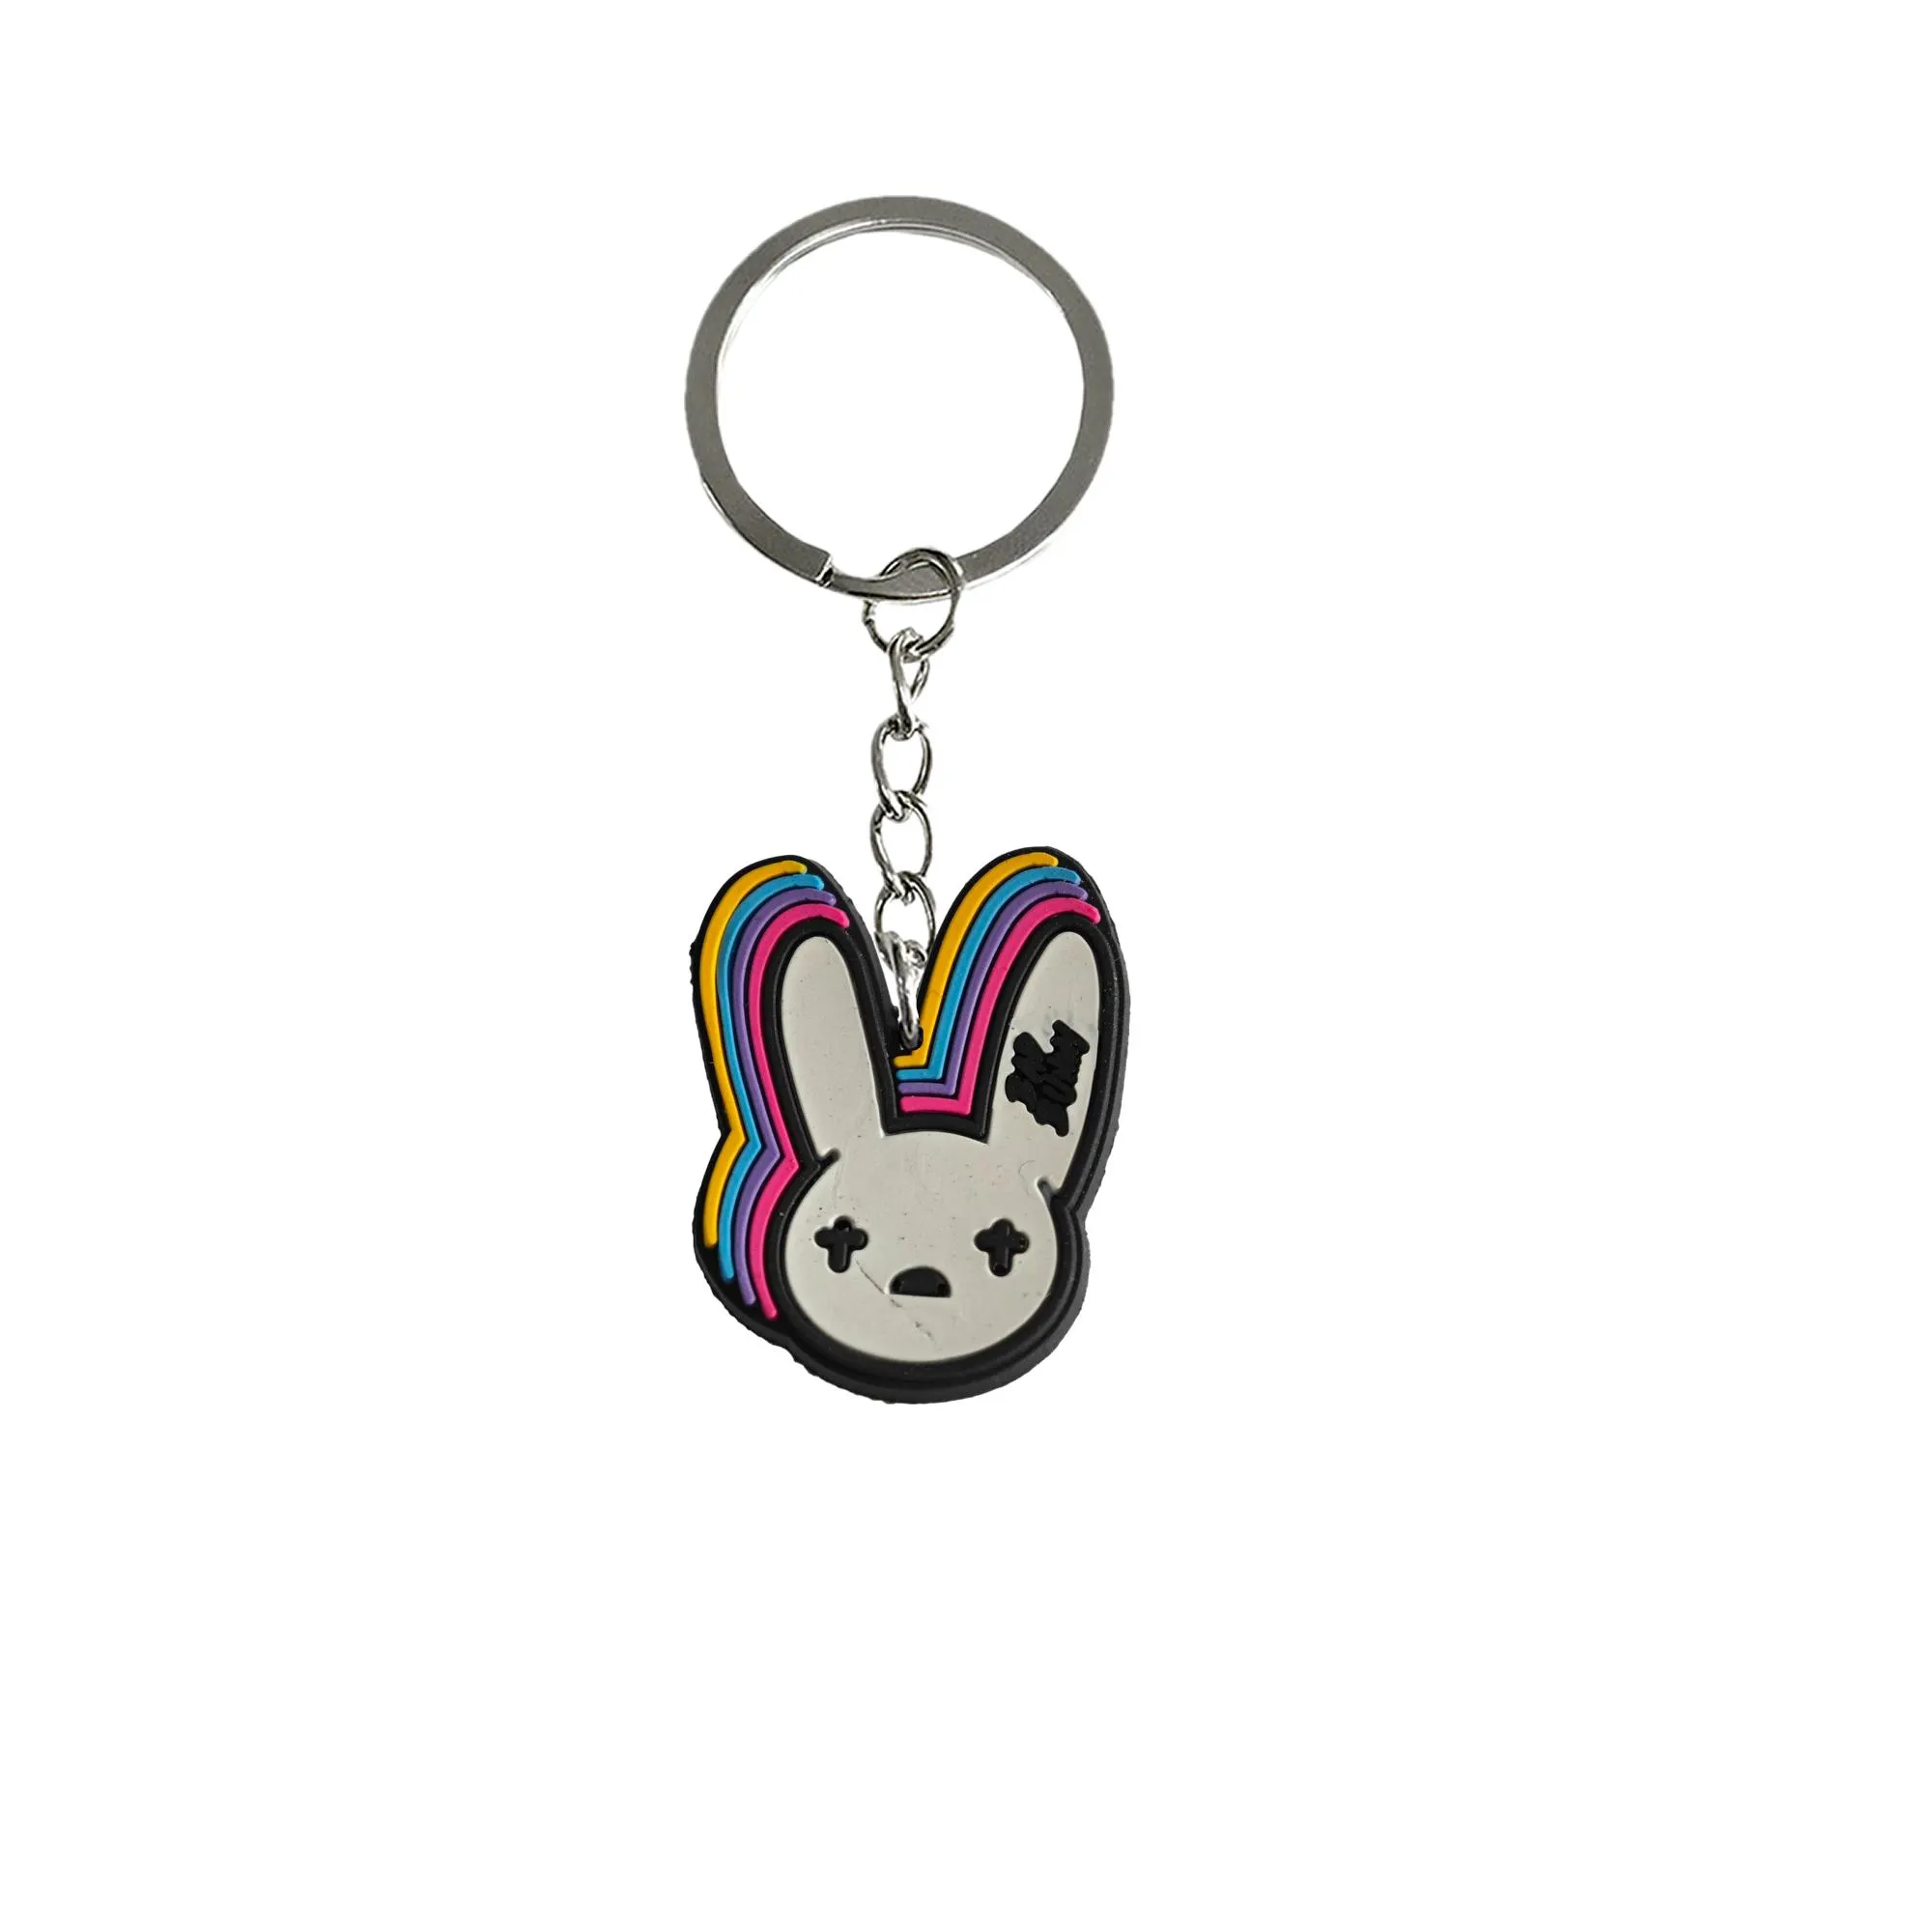 bad rabbit 51 keychain for goodie bag stuffers supplies car keyring keychains boys suitable schoolbag backpacks key chain party favors gift cute silicone adult